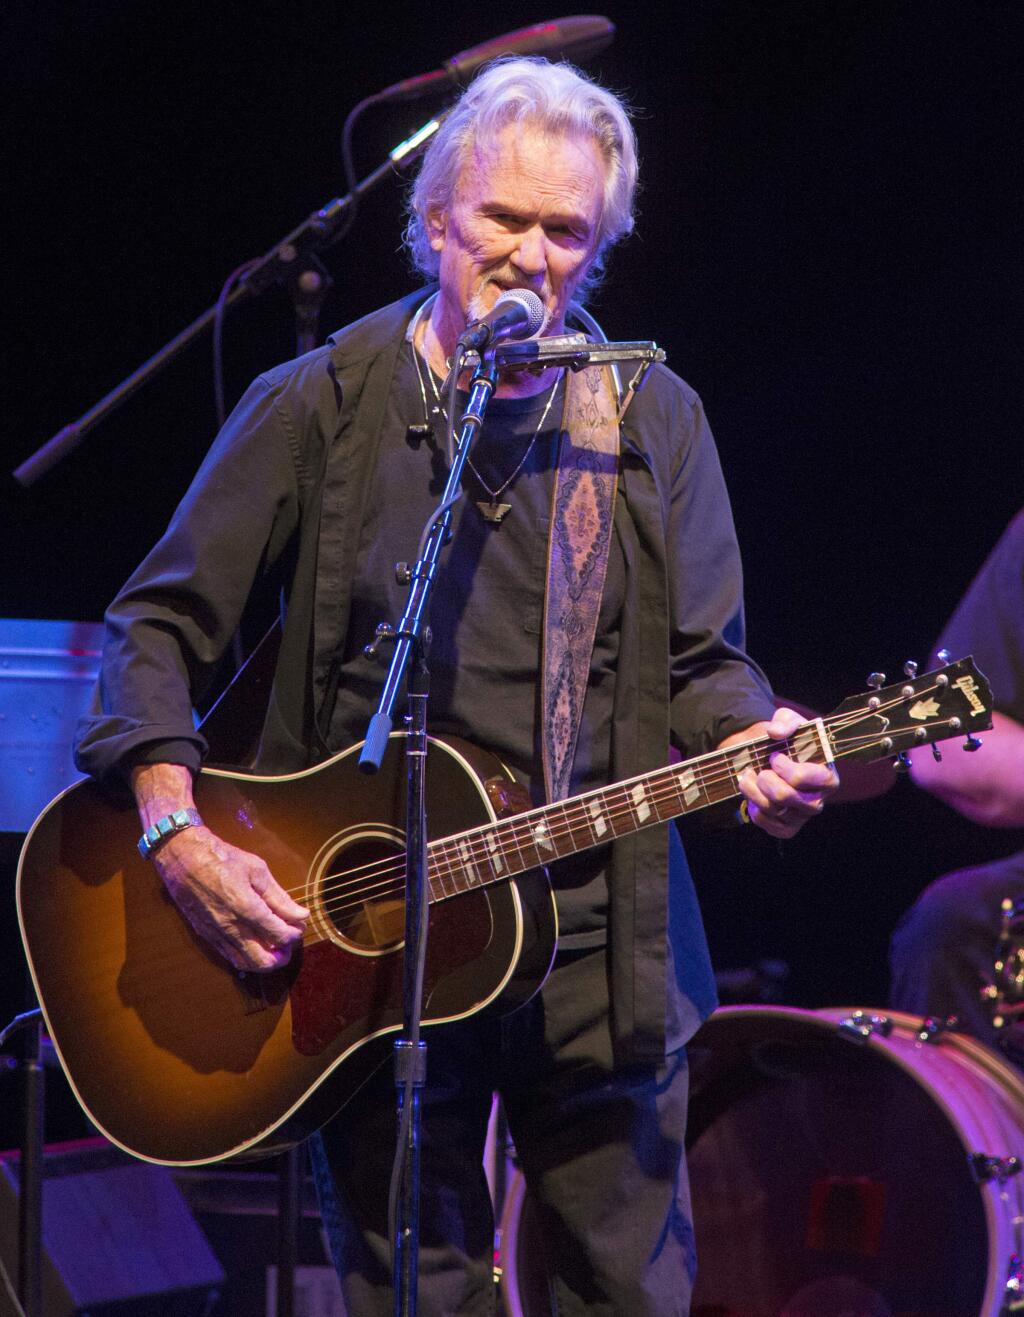 Kris Kristofferson performs in concert at The American Music Theatre on Friday, April 12, 2019, in Lancaster, Pa. (Photo by Owen Sweeney/Invision/AP)